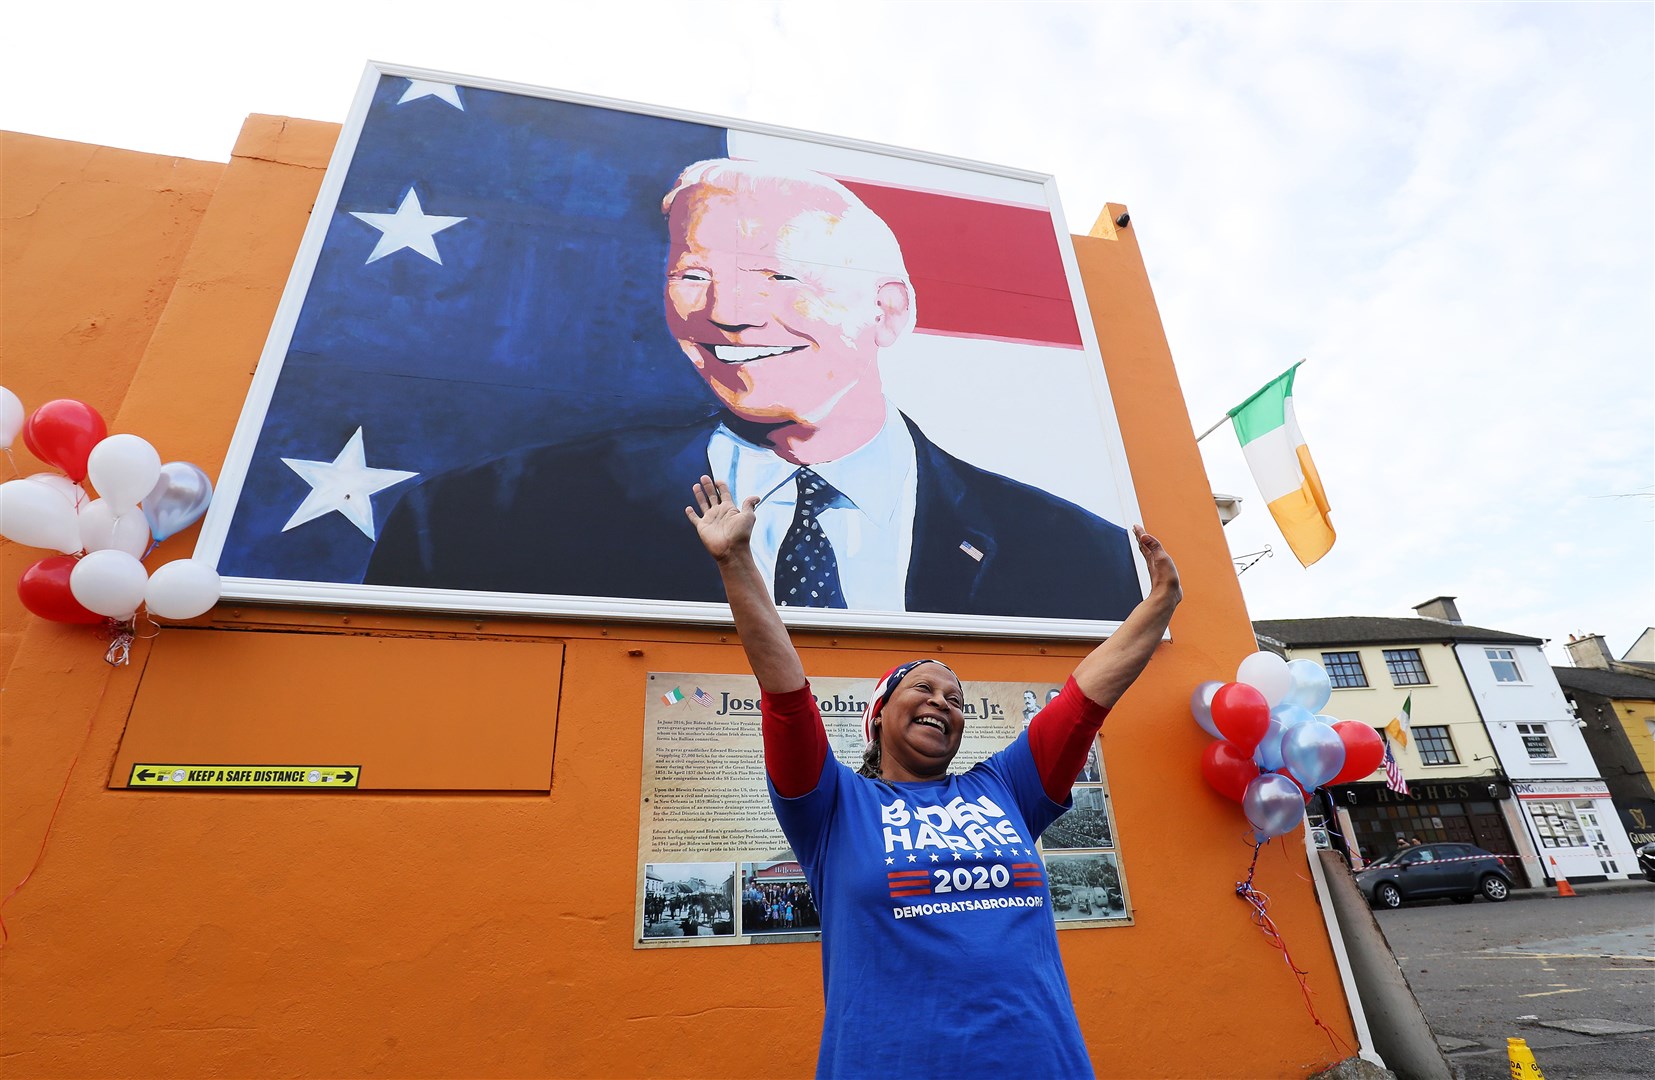 There have been celebrations in Ireland following Joe Biden’s presidential election victory (Brian Lawless/PA)